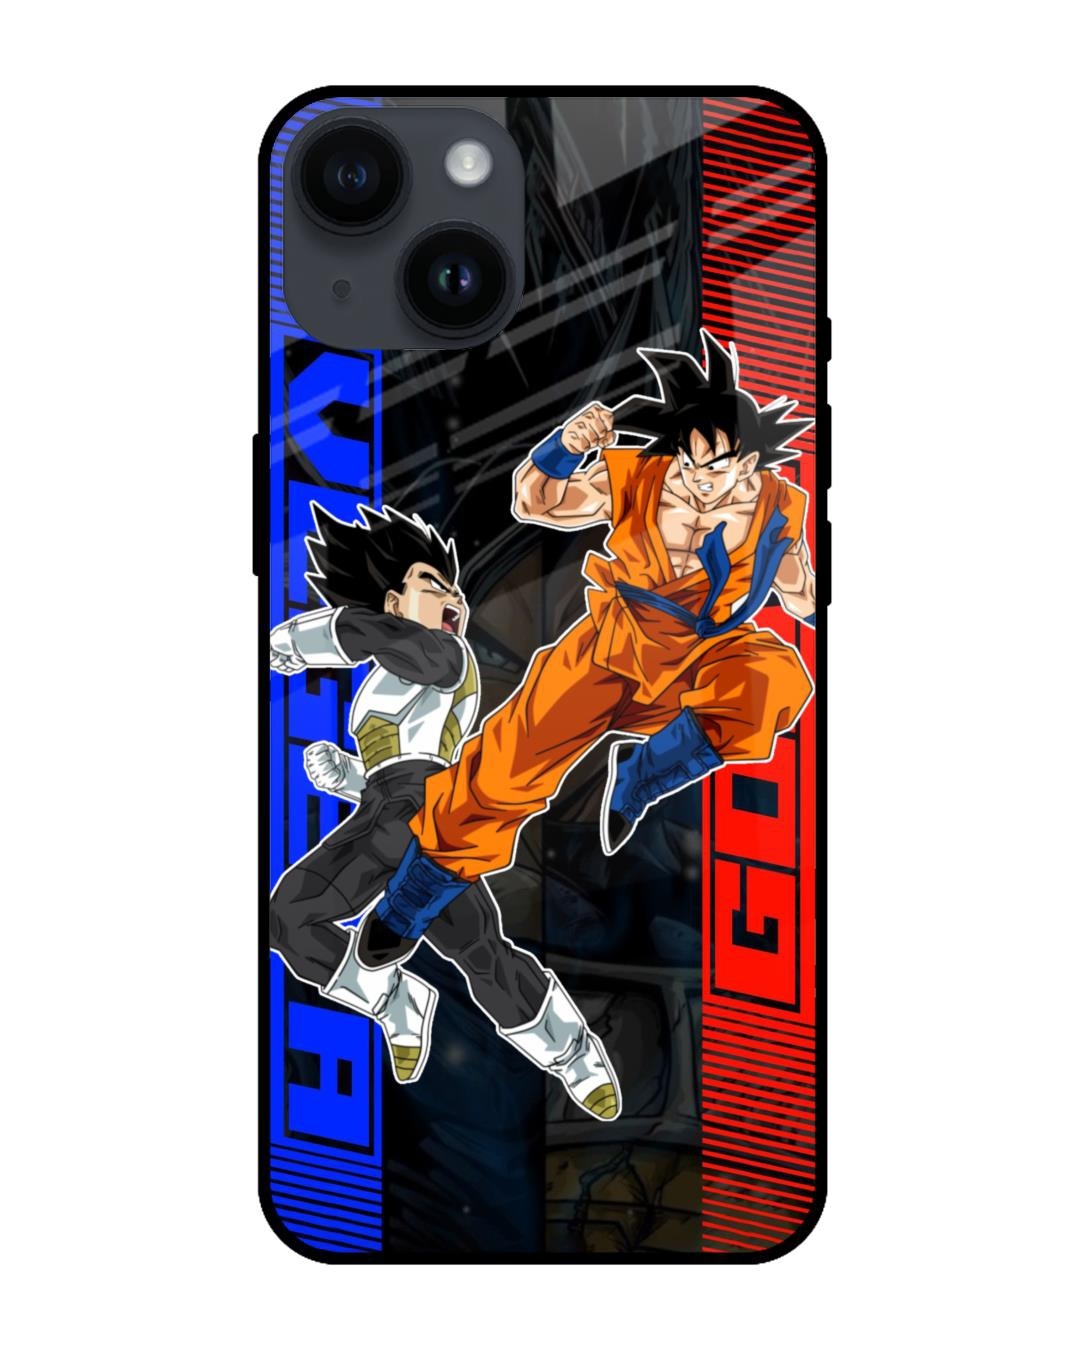 Pin on Phone Cases Phone Cover Awesome by Teespread